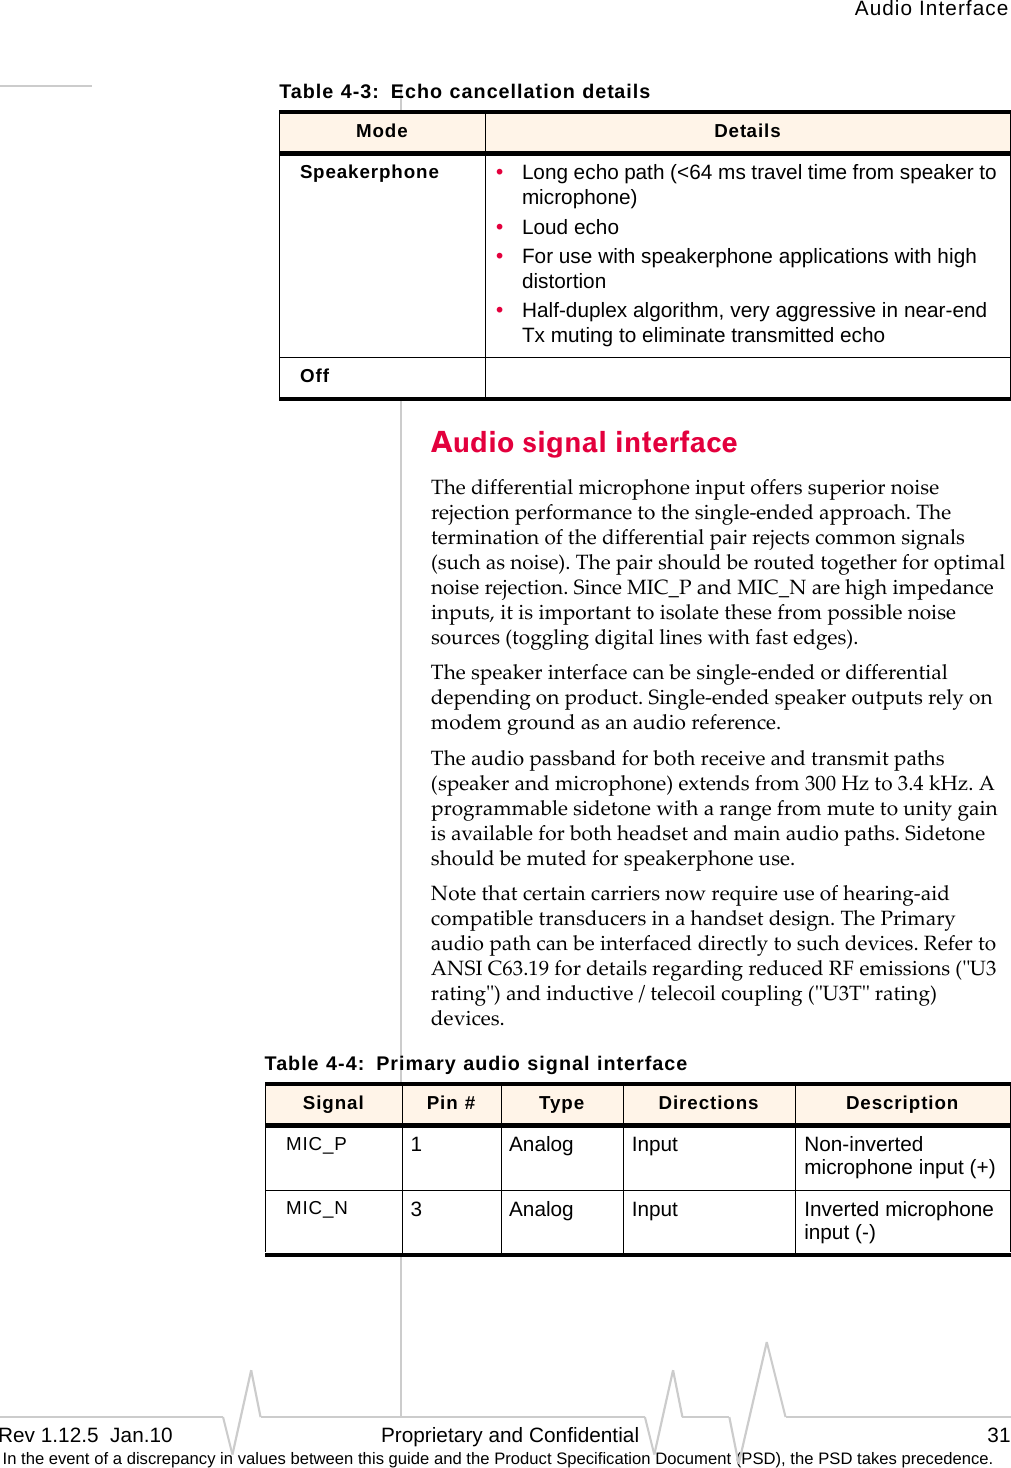 Audio InterfaceRev 1.12.5  Jan.10   Proprietary and Confidential 31 In the event of a discrepancy in values between this guide and the Product Specification Document (PSD), the PSD takes precedence.Audio signal interfaceThedifferentialmicrophoneinputofferssuperiornoiserejectionperformancetothesingle‐endedapproach.Theterminationofthedifferentialpairrejectscommonsignals(suchasnoise).Thepairshouldberoutedtogetherforoptimalnoiserejection.SinceMIC_PandMIC_Narehighimpedanceinputs,itisimportanttoisolatethesefrompossiblenoisesources(togglingdigitallineswithfastedges).Thespeakerinterfacecanbesingle‐endedordifferentialdependingonproduct.Single‐endedspeakeroutputsrelyonmodemgroundasanaudioreference.Theaudiopassbandforbothreceiveandtransmitpaths(speakerandmicrophone)extendsfrom300Hzto3.4kHz.Aprogrammablesidetonewitharangefrommutetounitygainisavailableforbothheadsetandmainaudiopaths.Sidetoneshouldbemutedforspeakerphoneuse.Notethatcertaincarriersnowrequireuseofhearing‐aidcompatibletransducersinahandsetdesign.ThePrimaryaudiopathcanbeinterfaceddirectlytosuchdevices.RefertoANSIC63.19fordetailsregardingreducedRFemissions(ʺU3ratingʺ)andinductive/telecoilcoupling(ʺU3Tʺrating)devices.Speakerphone •Long echo path (&lt;64 ms travel time from speaker to microphone)•Loud echo•For use with speakerphone applications with high distortion•Half-duplex algorithm, very aggressive in near-end Tx muting to eliminate transmitted echoOffTable 4-3:  Echo cancellation detailsMode DetailsTable 4-4:  Primary audio signal interfaceSignal Pin # Type Directions DescriptionMIC_P 1Analog Input Non-inverted microphone input (+)MIC_N 3Analog Input Inverted microphone input (-)